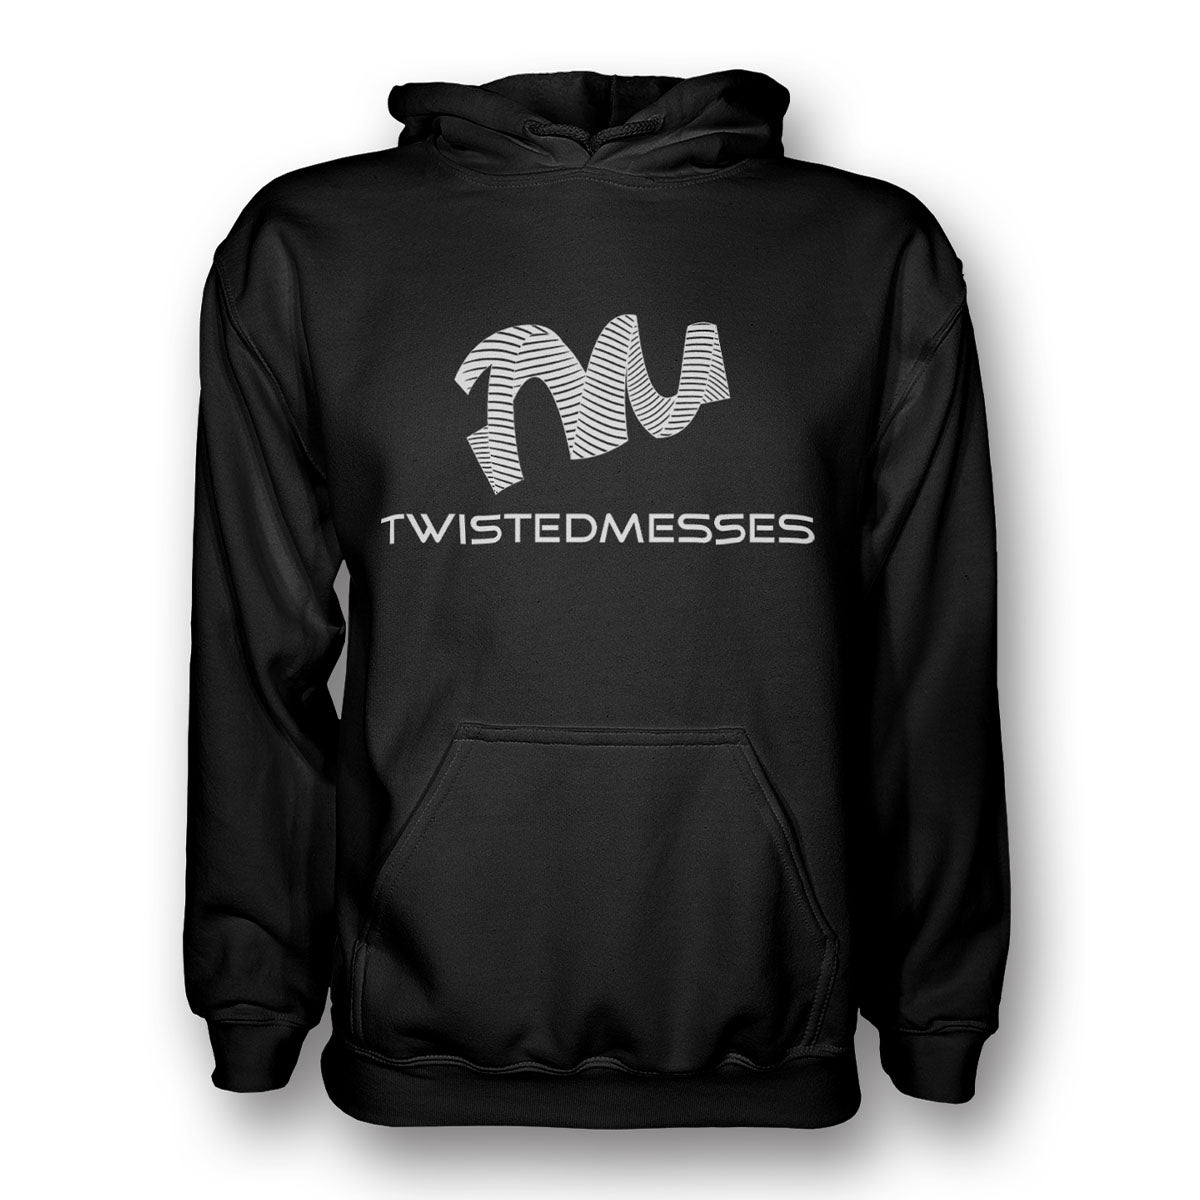 Hoodie Black/White by Twisted Messes